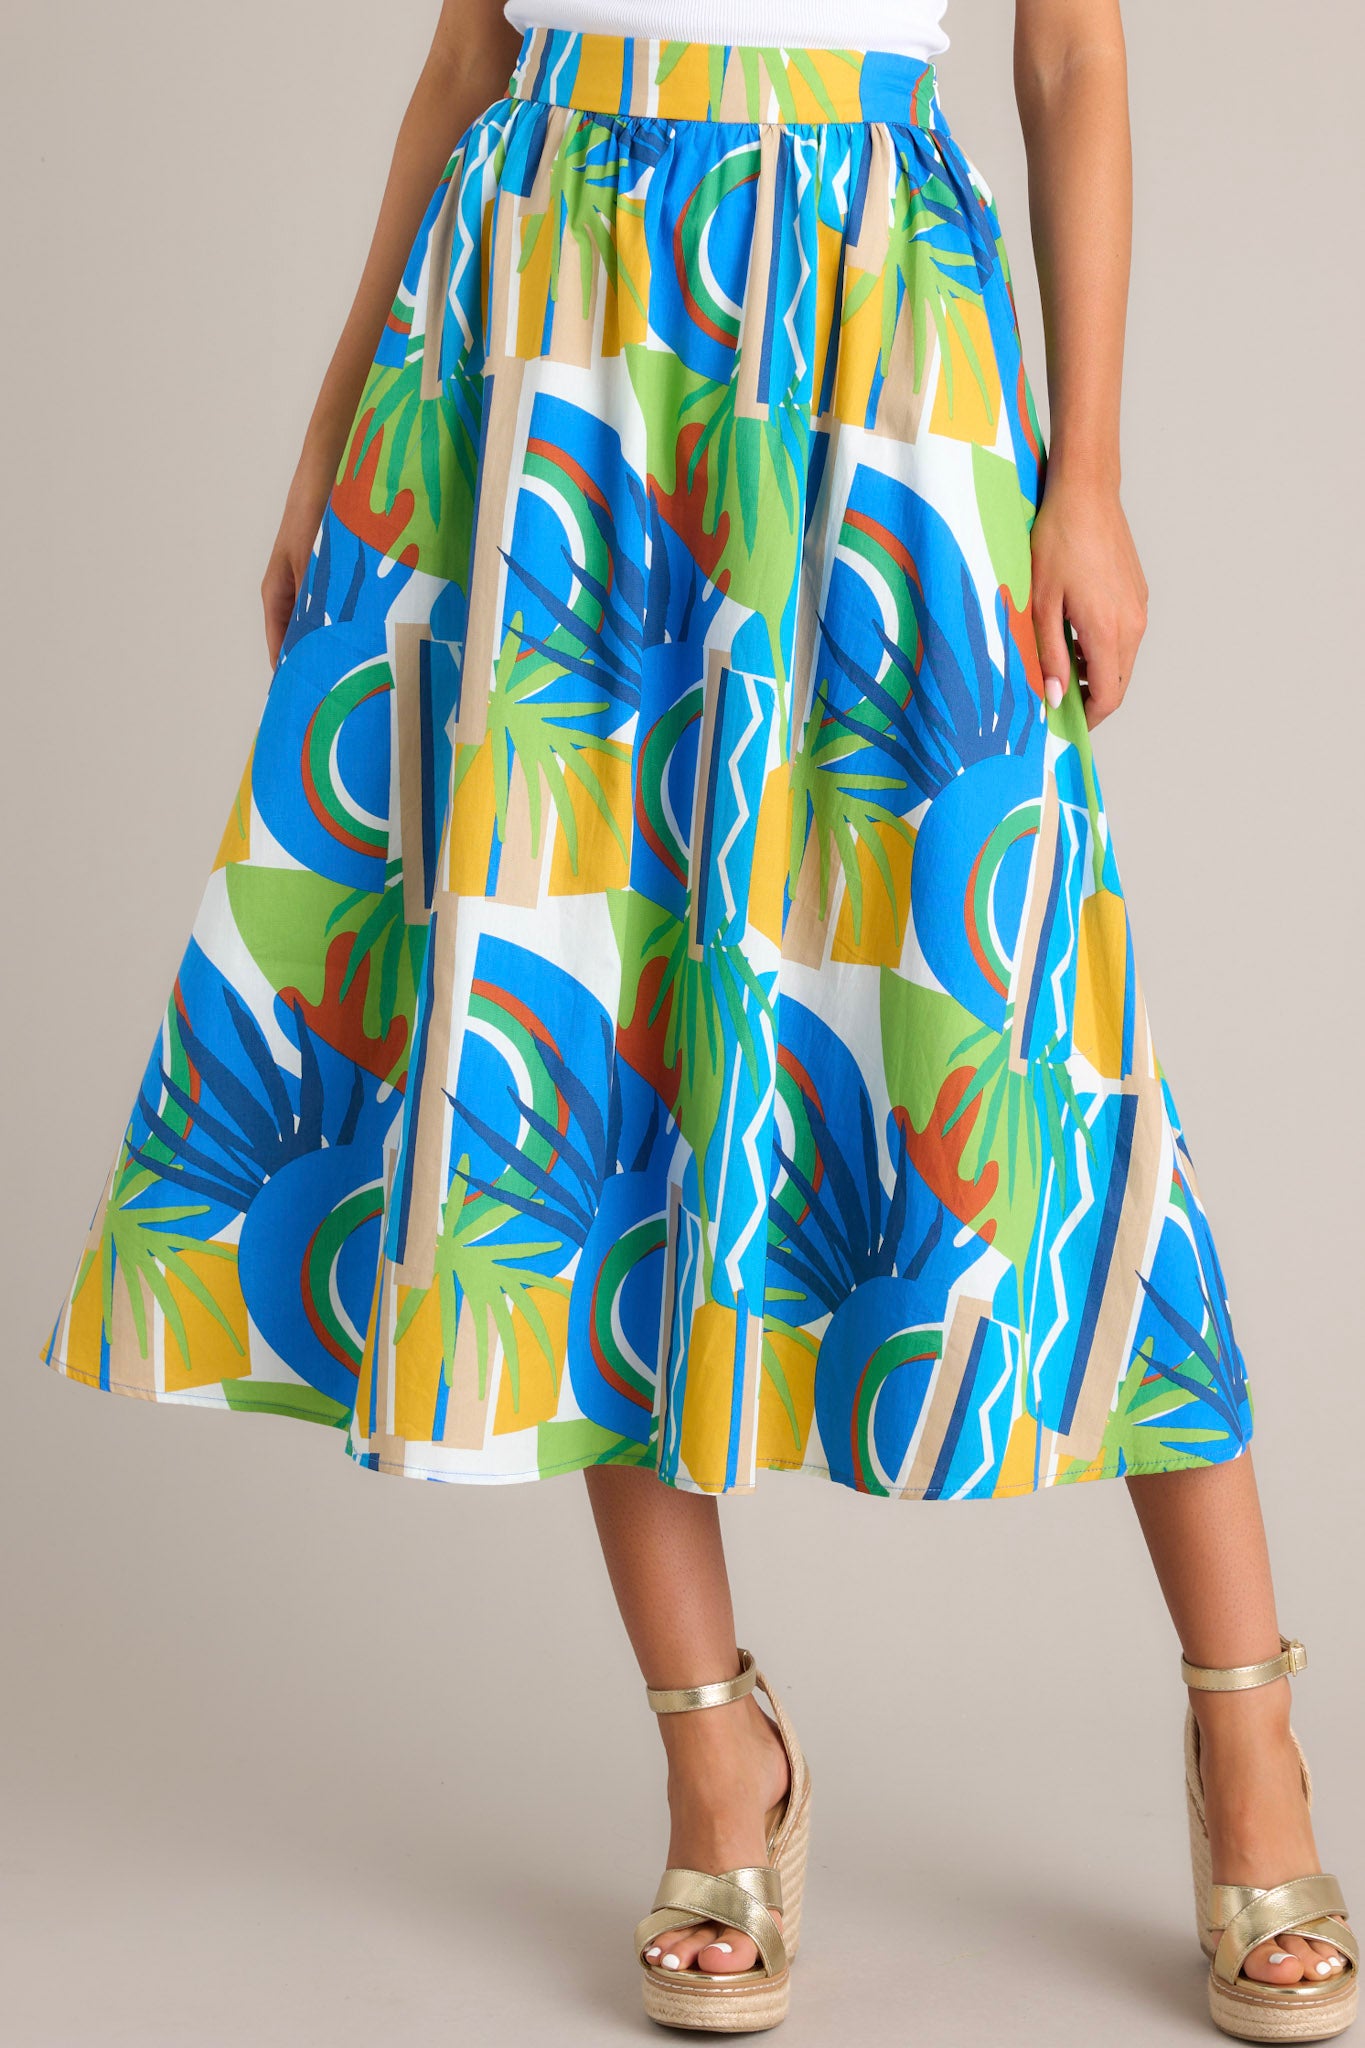 Close-up of the fabric and pattern of a high-waisted A-line skirt featuring an abstract design in blue, green, and yellow.